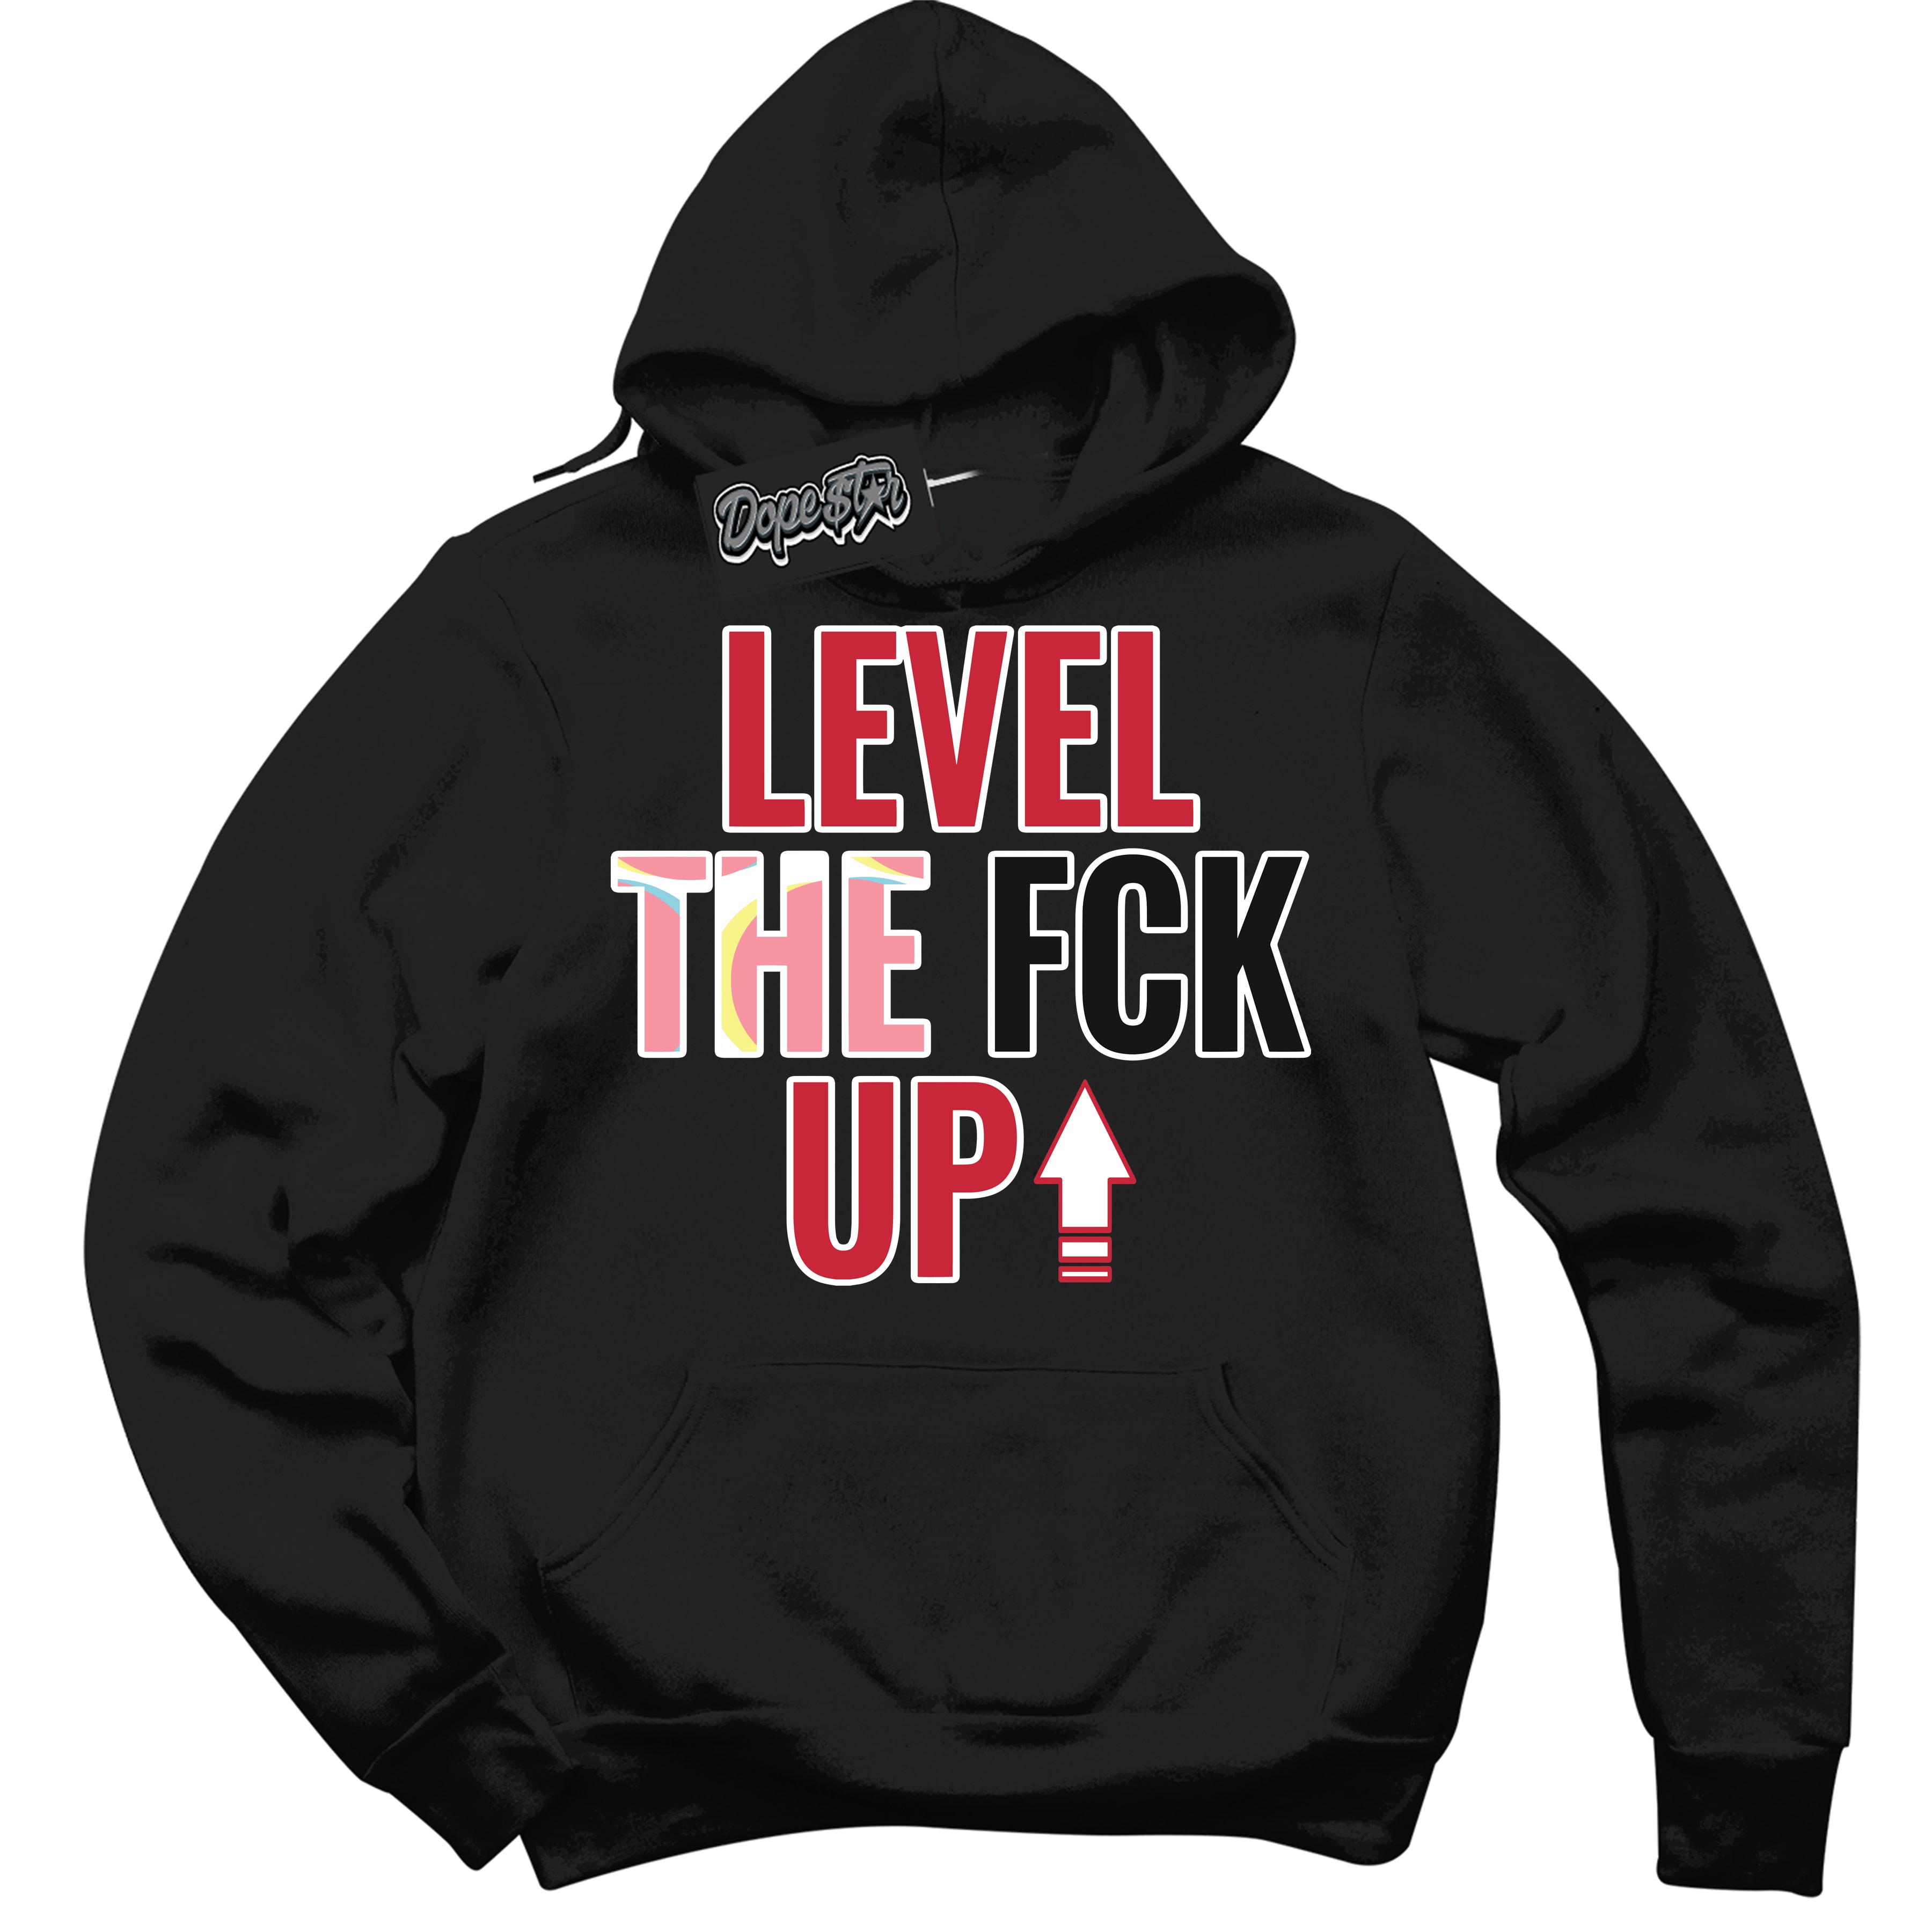 Cool Black Graphic DopeStar Hoodie with “ Level The Fck Up “ print, that perfectly matches Spider-Verse 1s sneakers